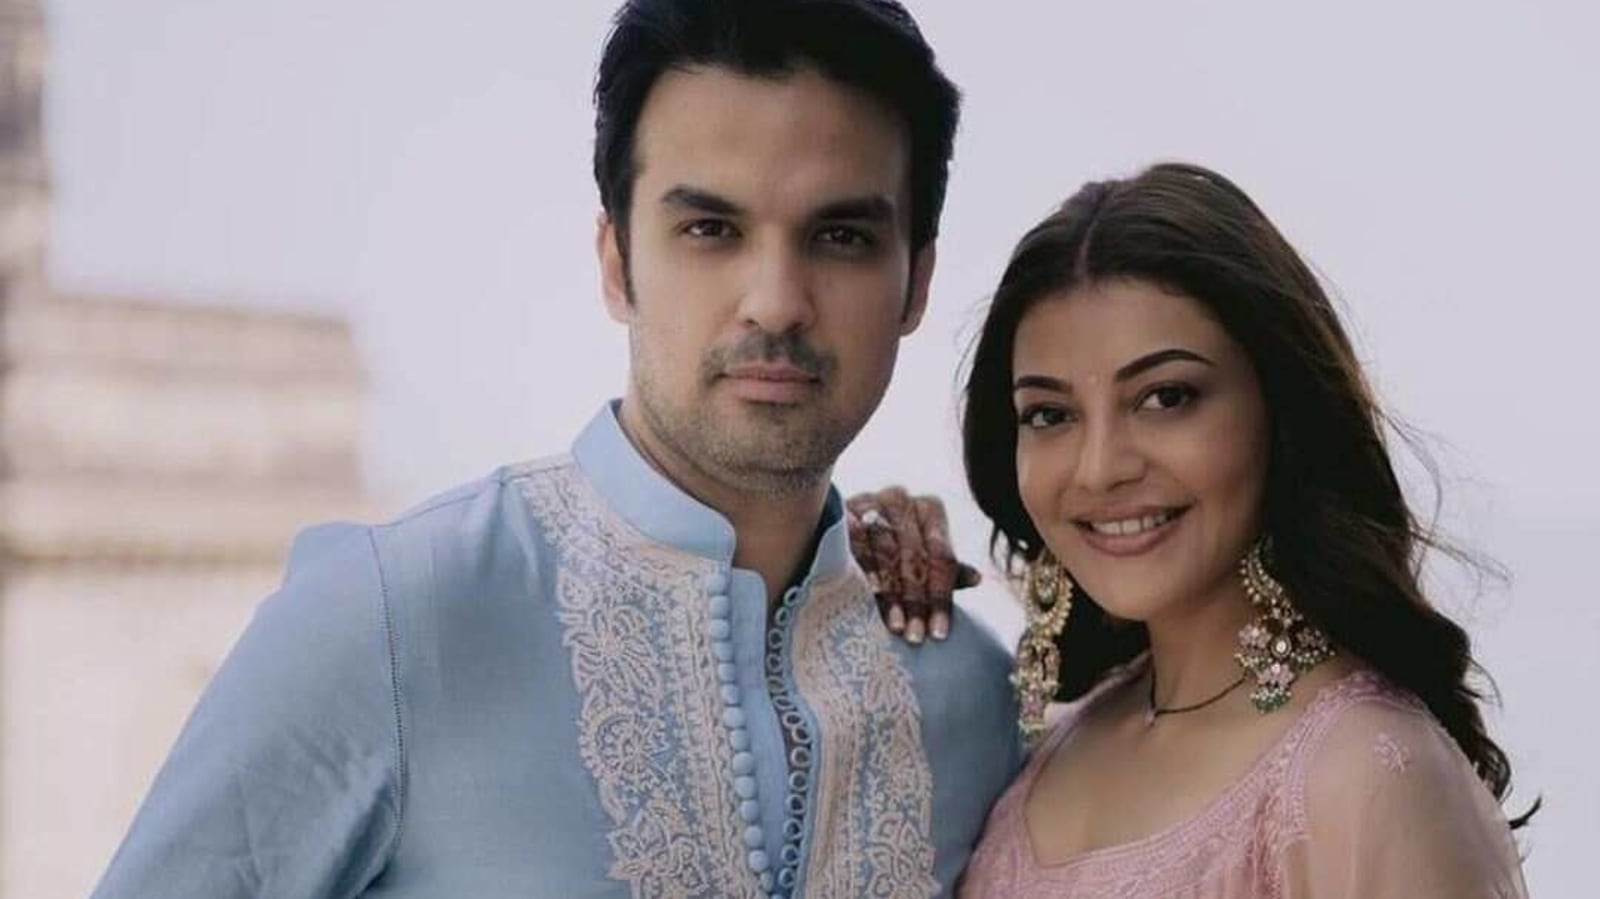 Www Kajal Xnx Com - Kajal Aggarwal gets 'bribes' from husband Gautam Kitchlu to make up for  lack of quality time with her. See photo | Bollywood - Hindustan Times